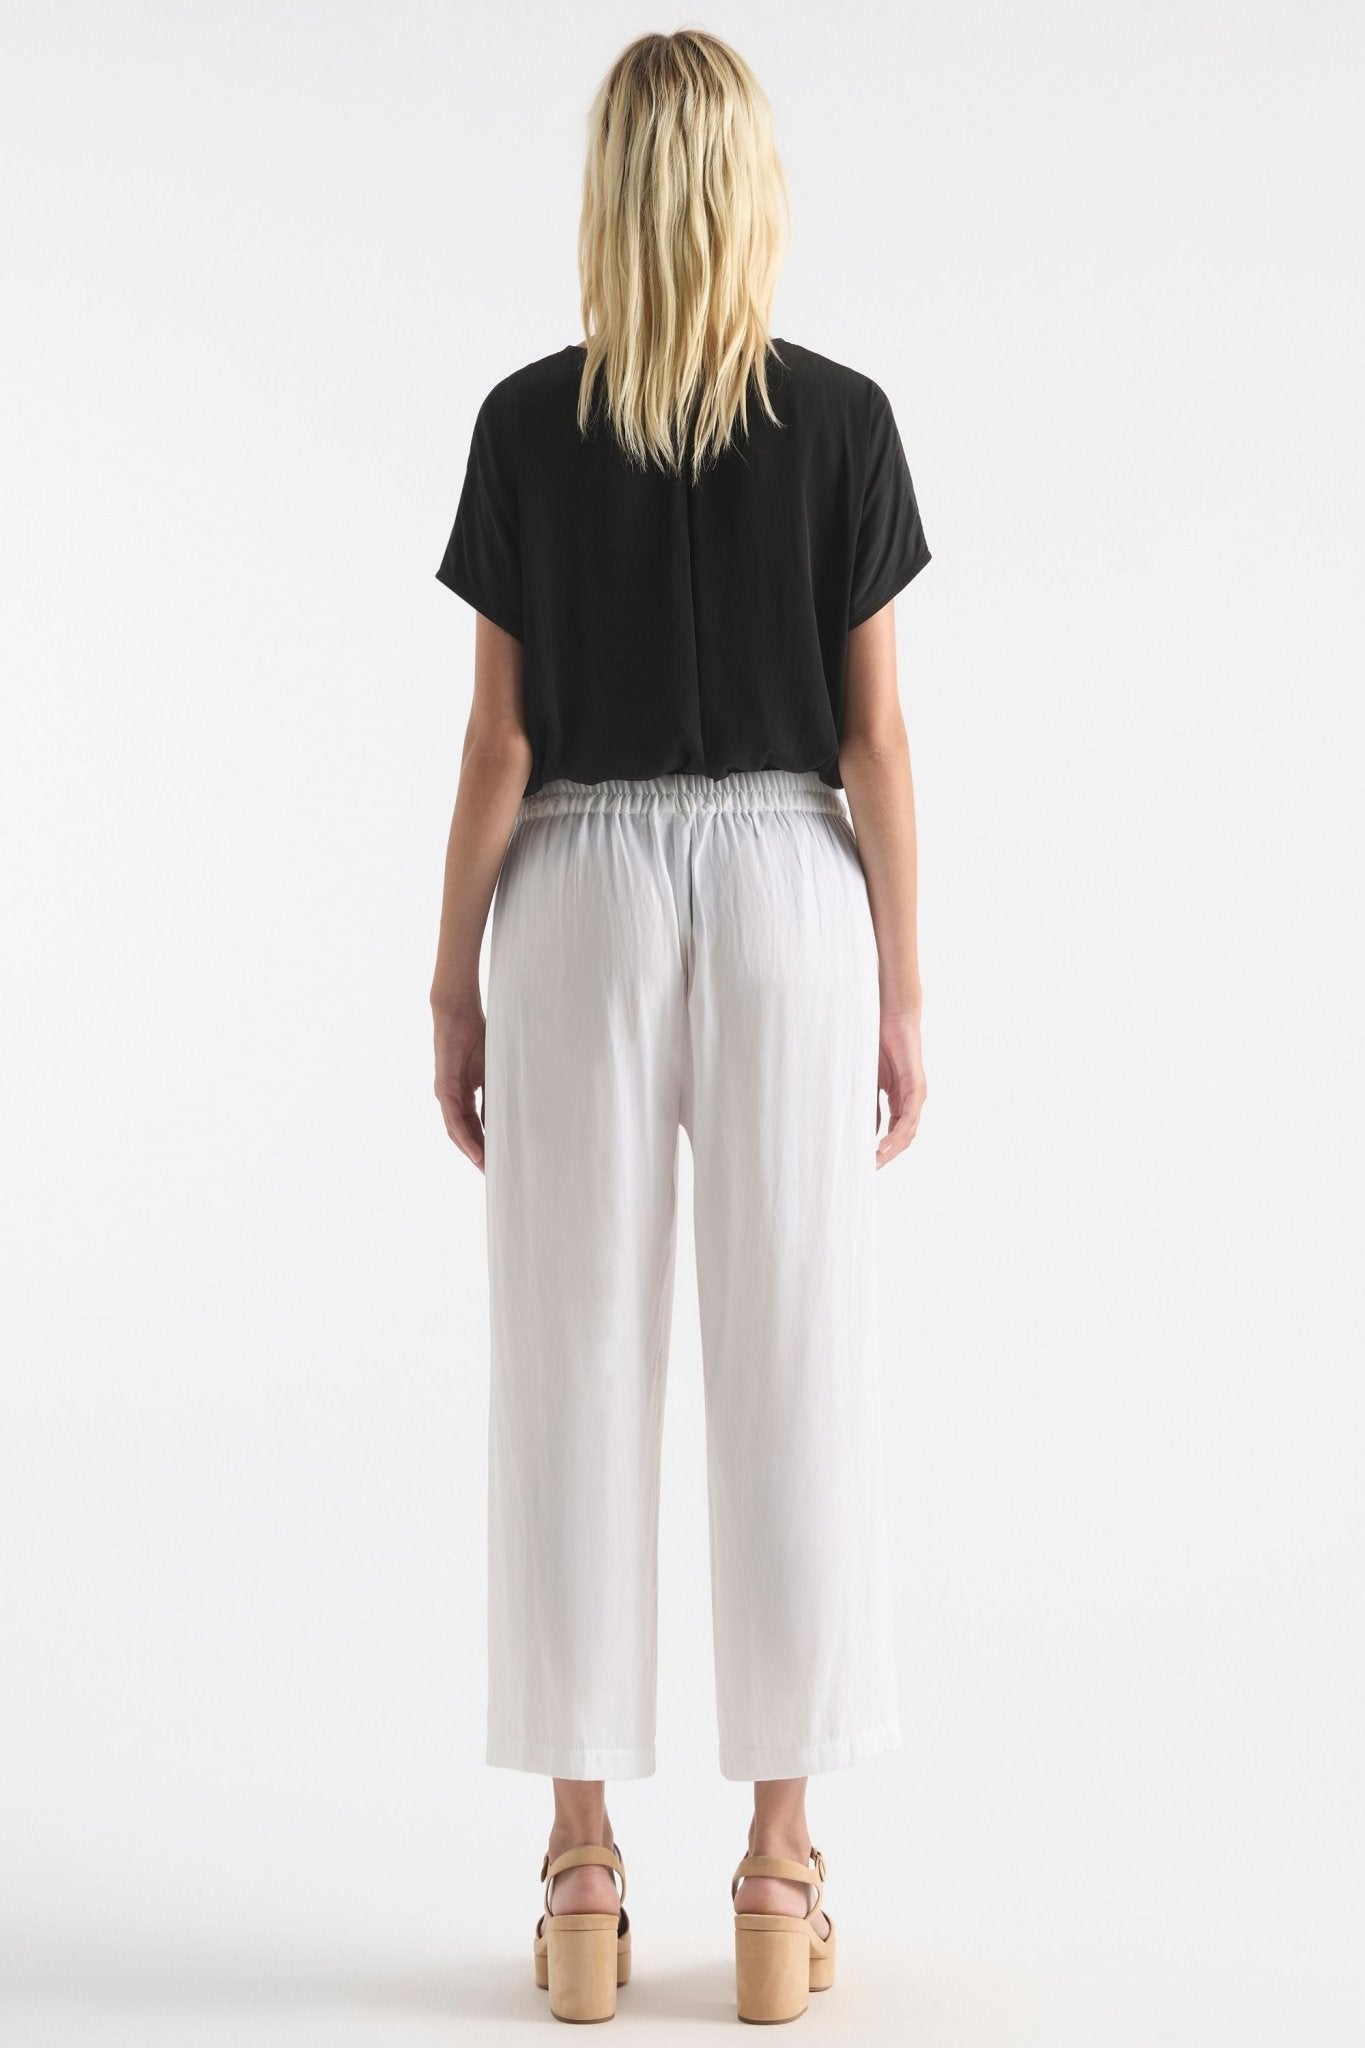 PACE PANT - F671740